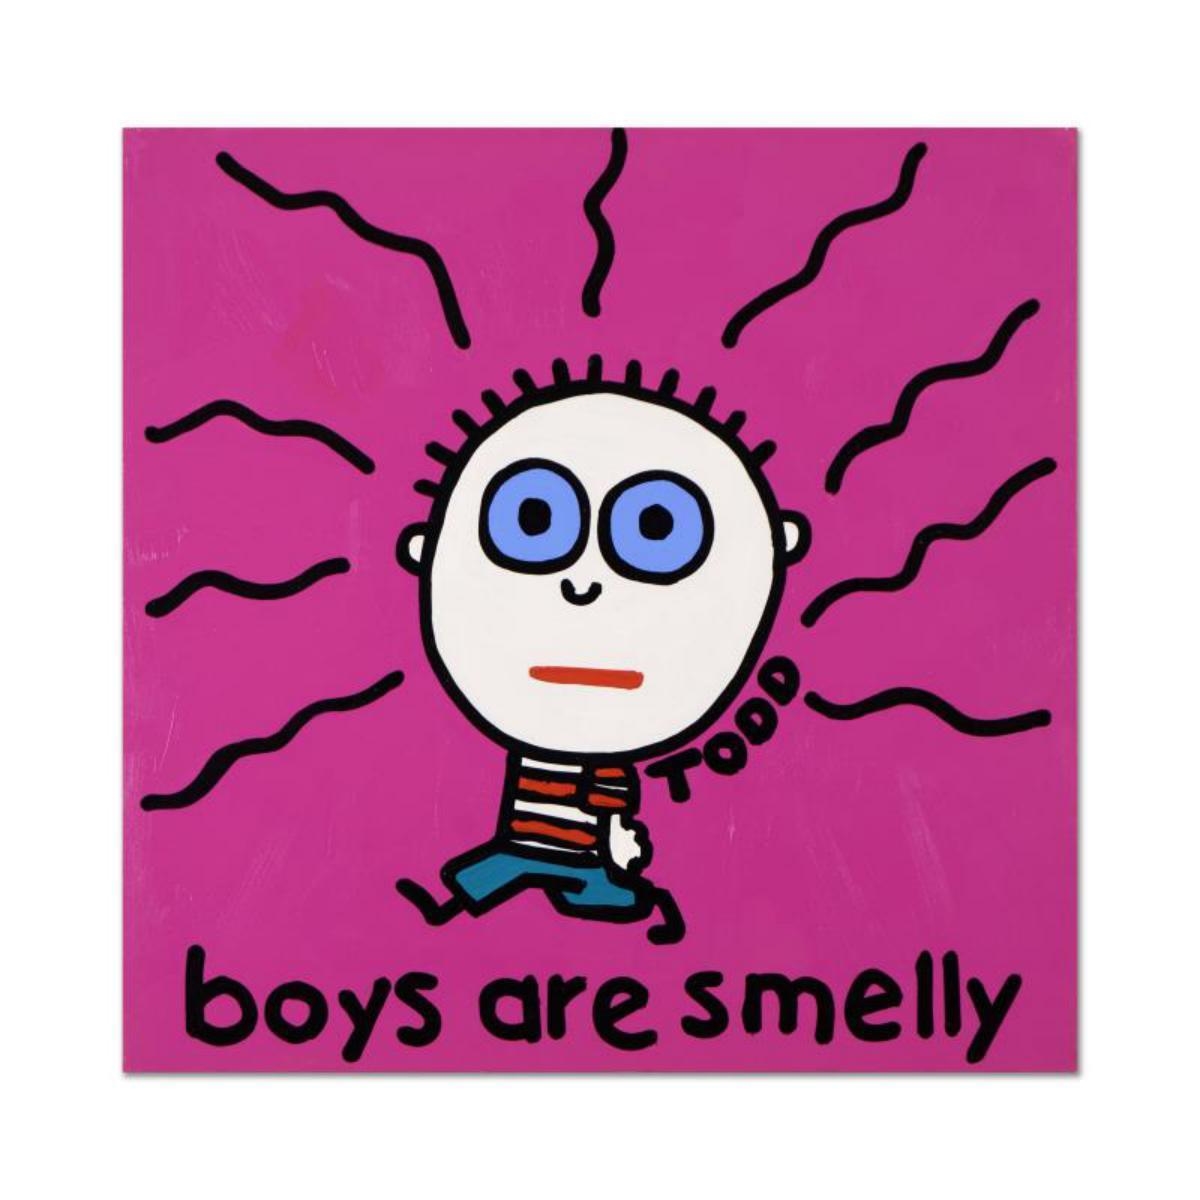 Artwork by Todd Goldman, Boys Are Smelly, Made of Original Acrylic Painting On Gallery Wrapped Canvas